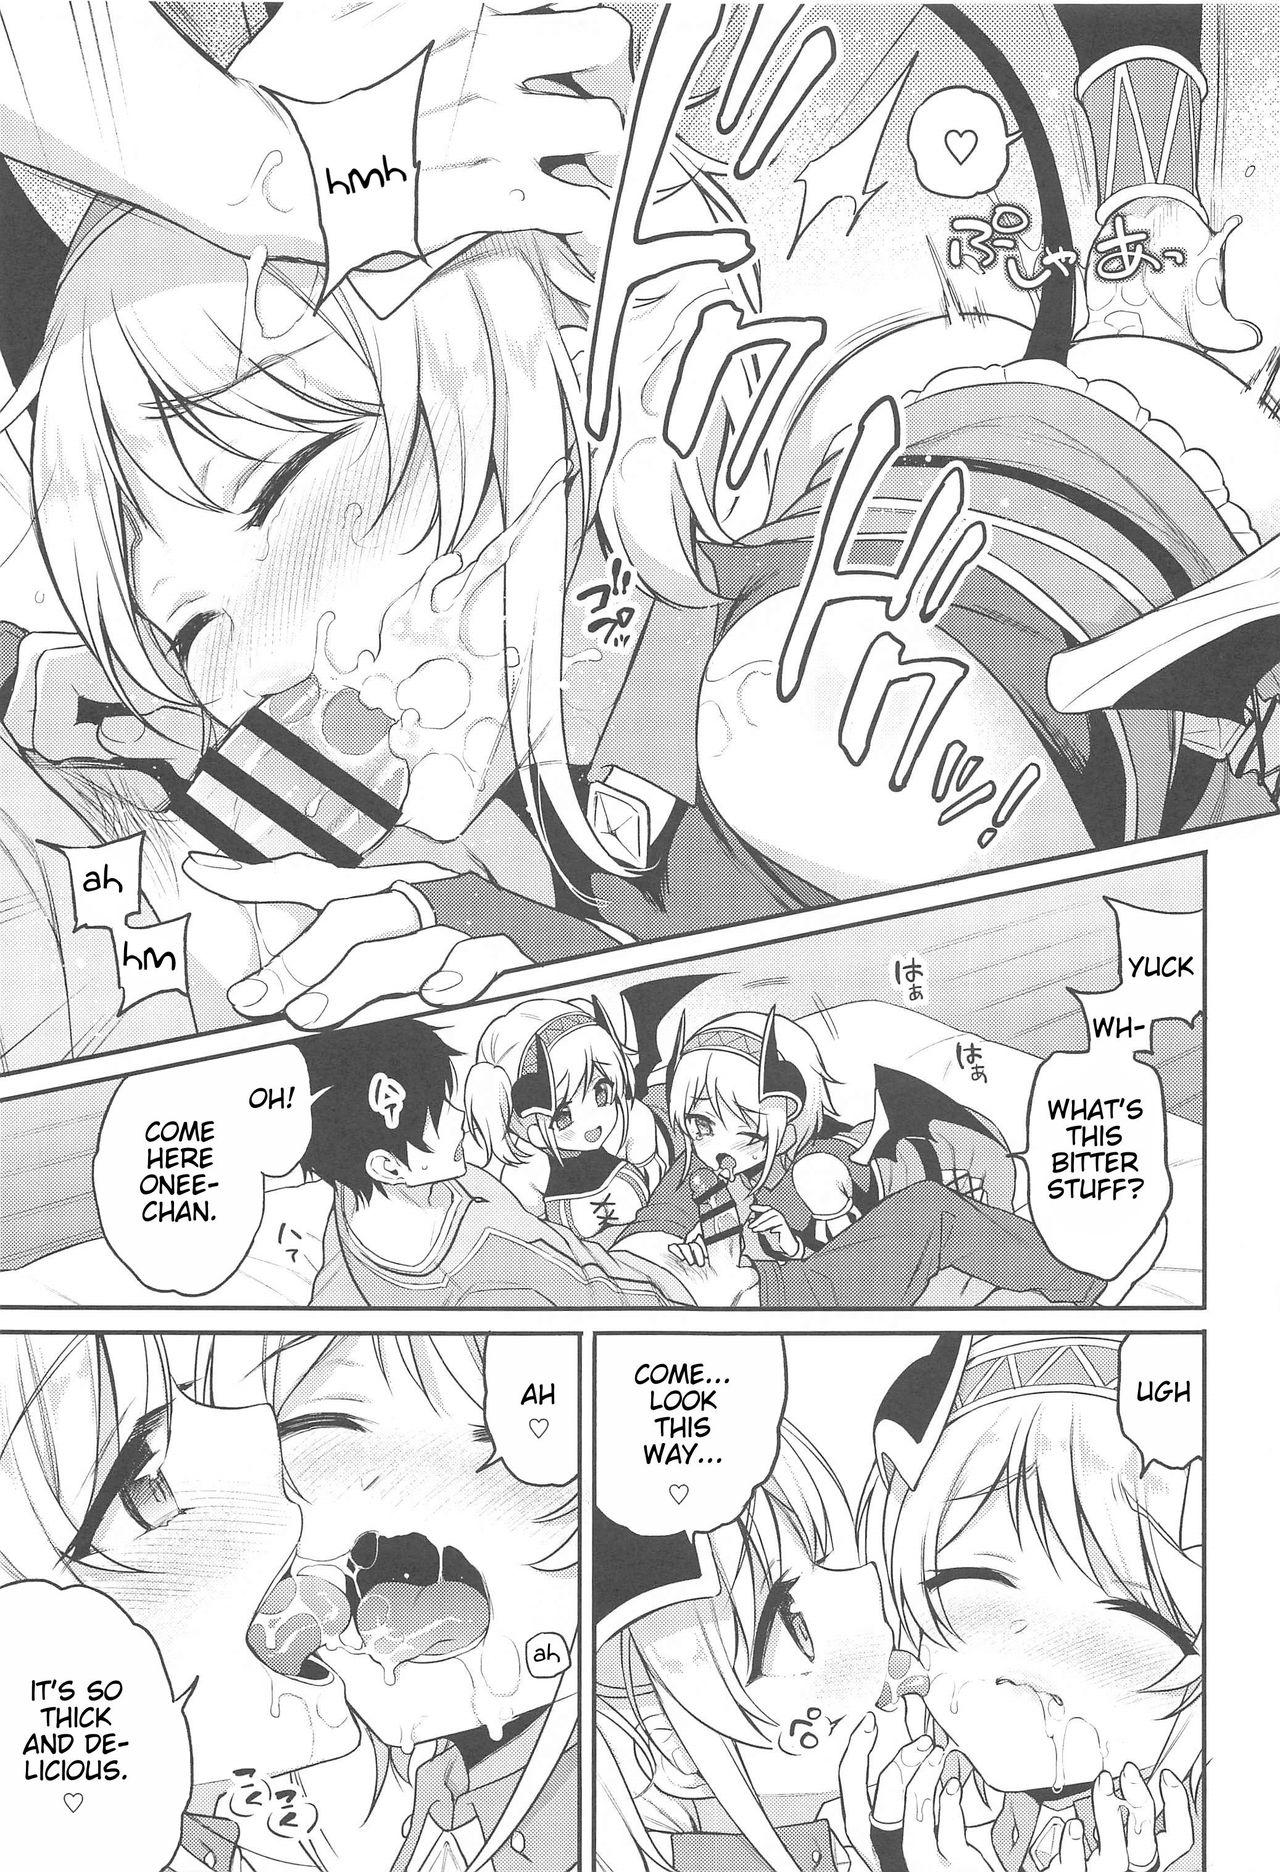 Wet Akari no Onee-chan Produce - Princess connect Mexican - Page 8